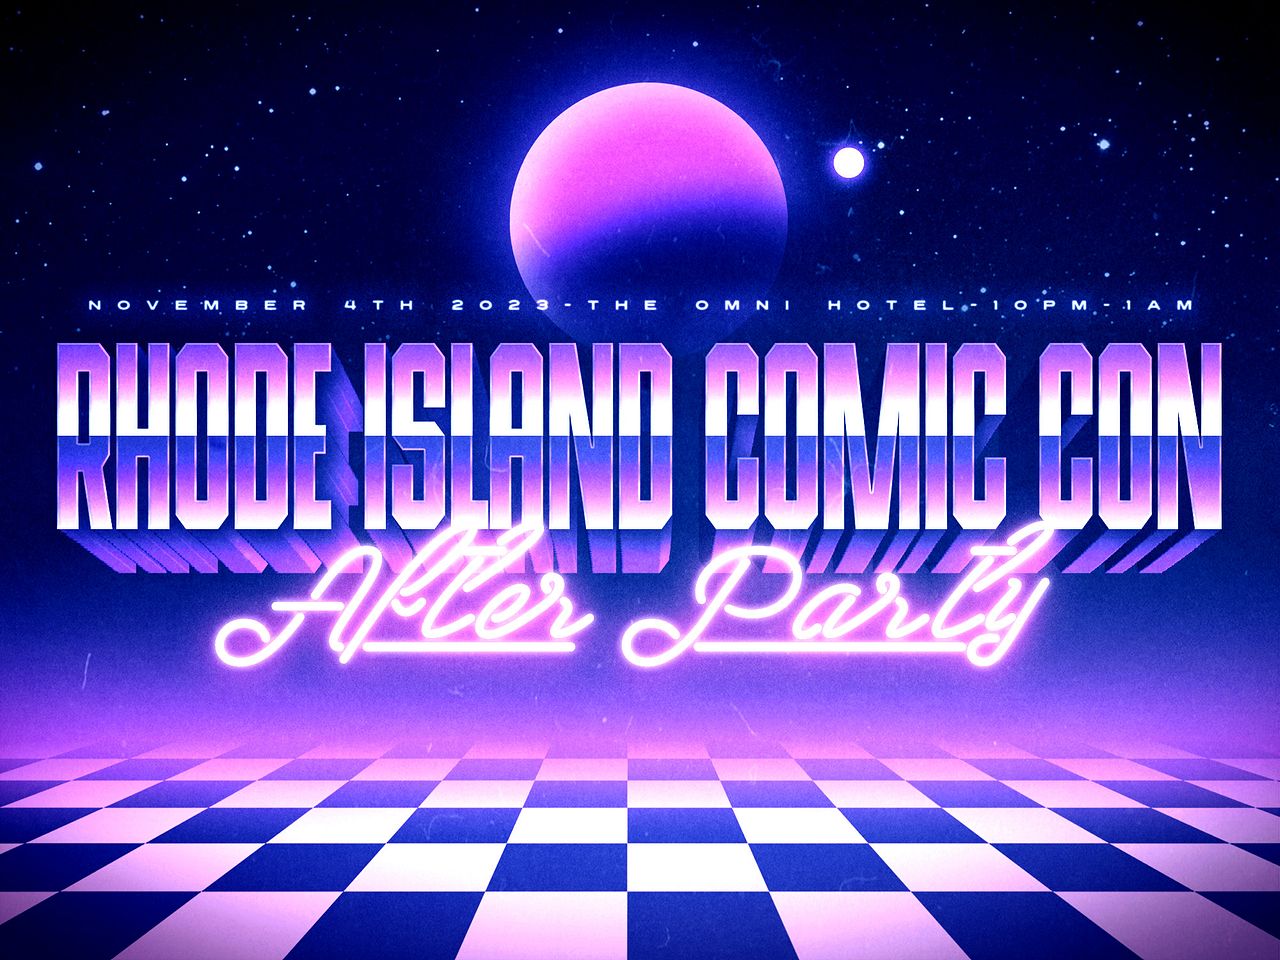 Rhode Island Comic Con After Party Tickets at Omni Hotel in Providence